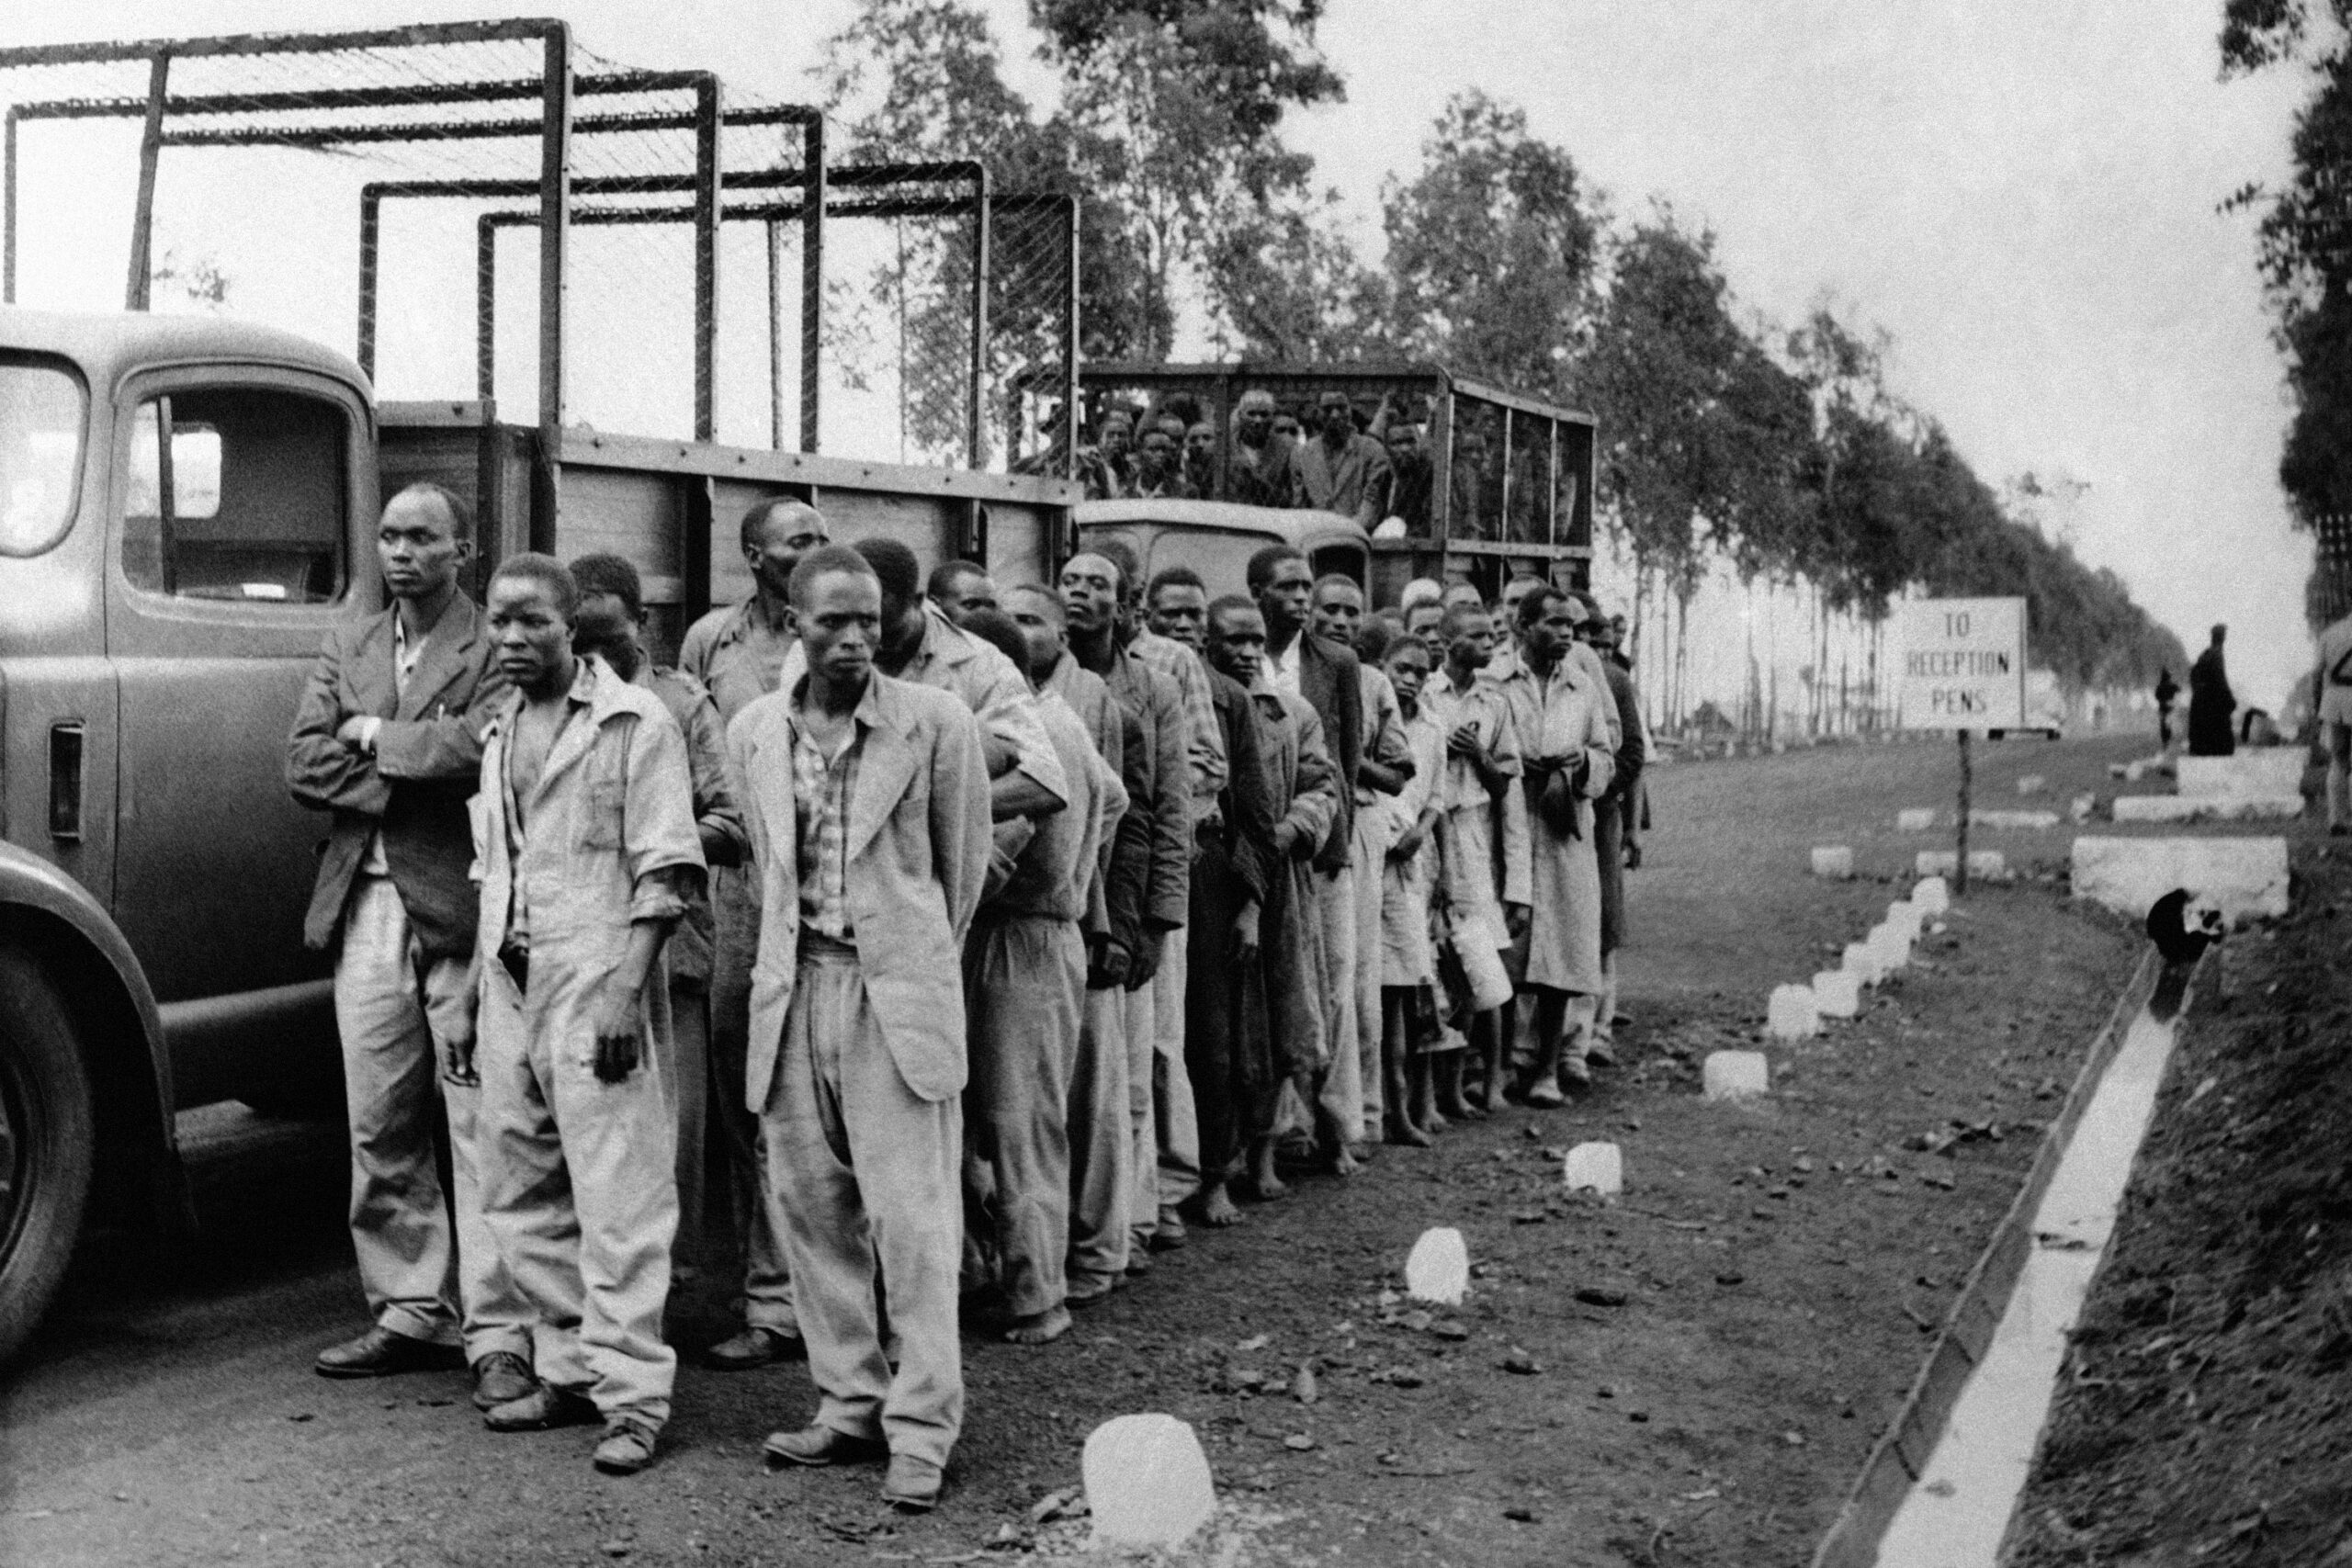 Two lorry loads transporting Kikuyu people arrive at a reception camp outside Nairobi, Kenya, on April 28, 1954, after 5,000 British troops and 1,000 armed police rounded up some 30,000 to 40,000 men for screening. The sweep followed the breakdown of the surrender invitation launched by the authorities after the capture of Mau Mau's "General China." At the reception camp many men were released after screening. Others were sent to detention camps by the sea. (AP Photo, File)